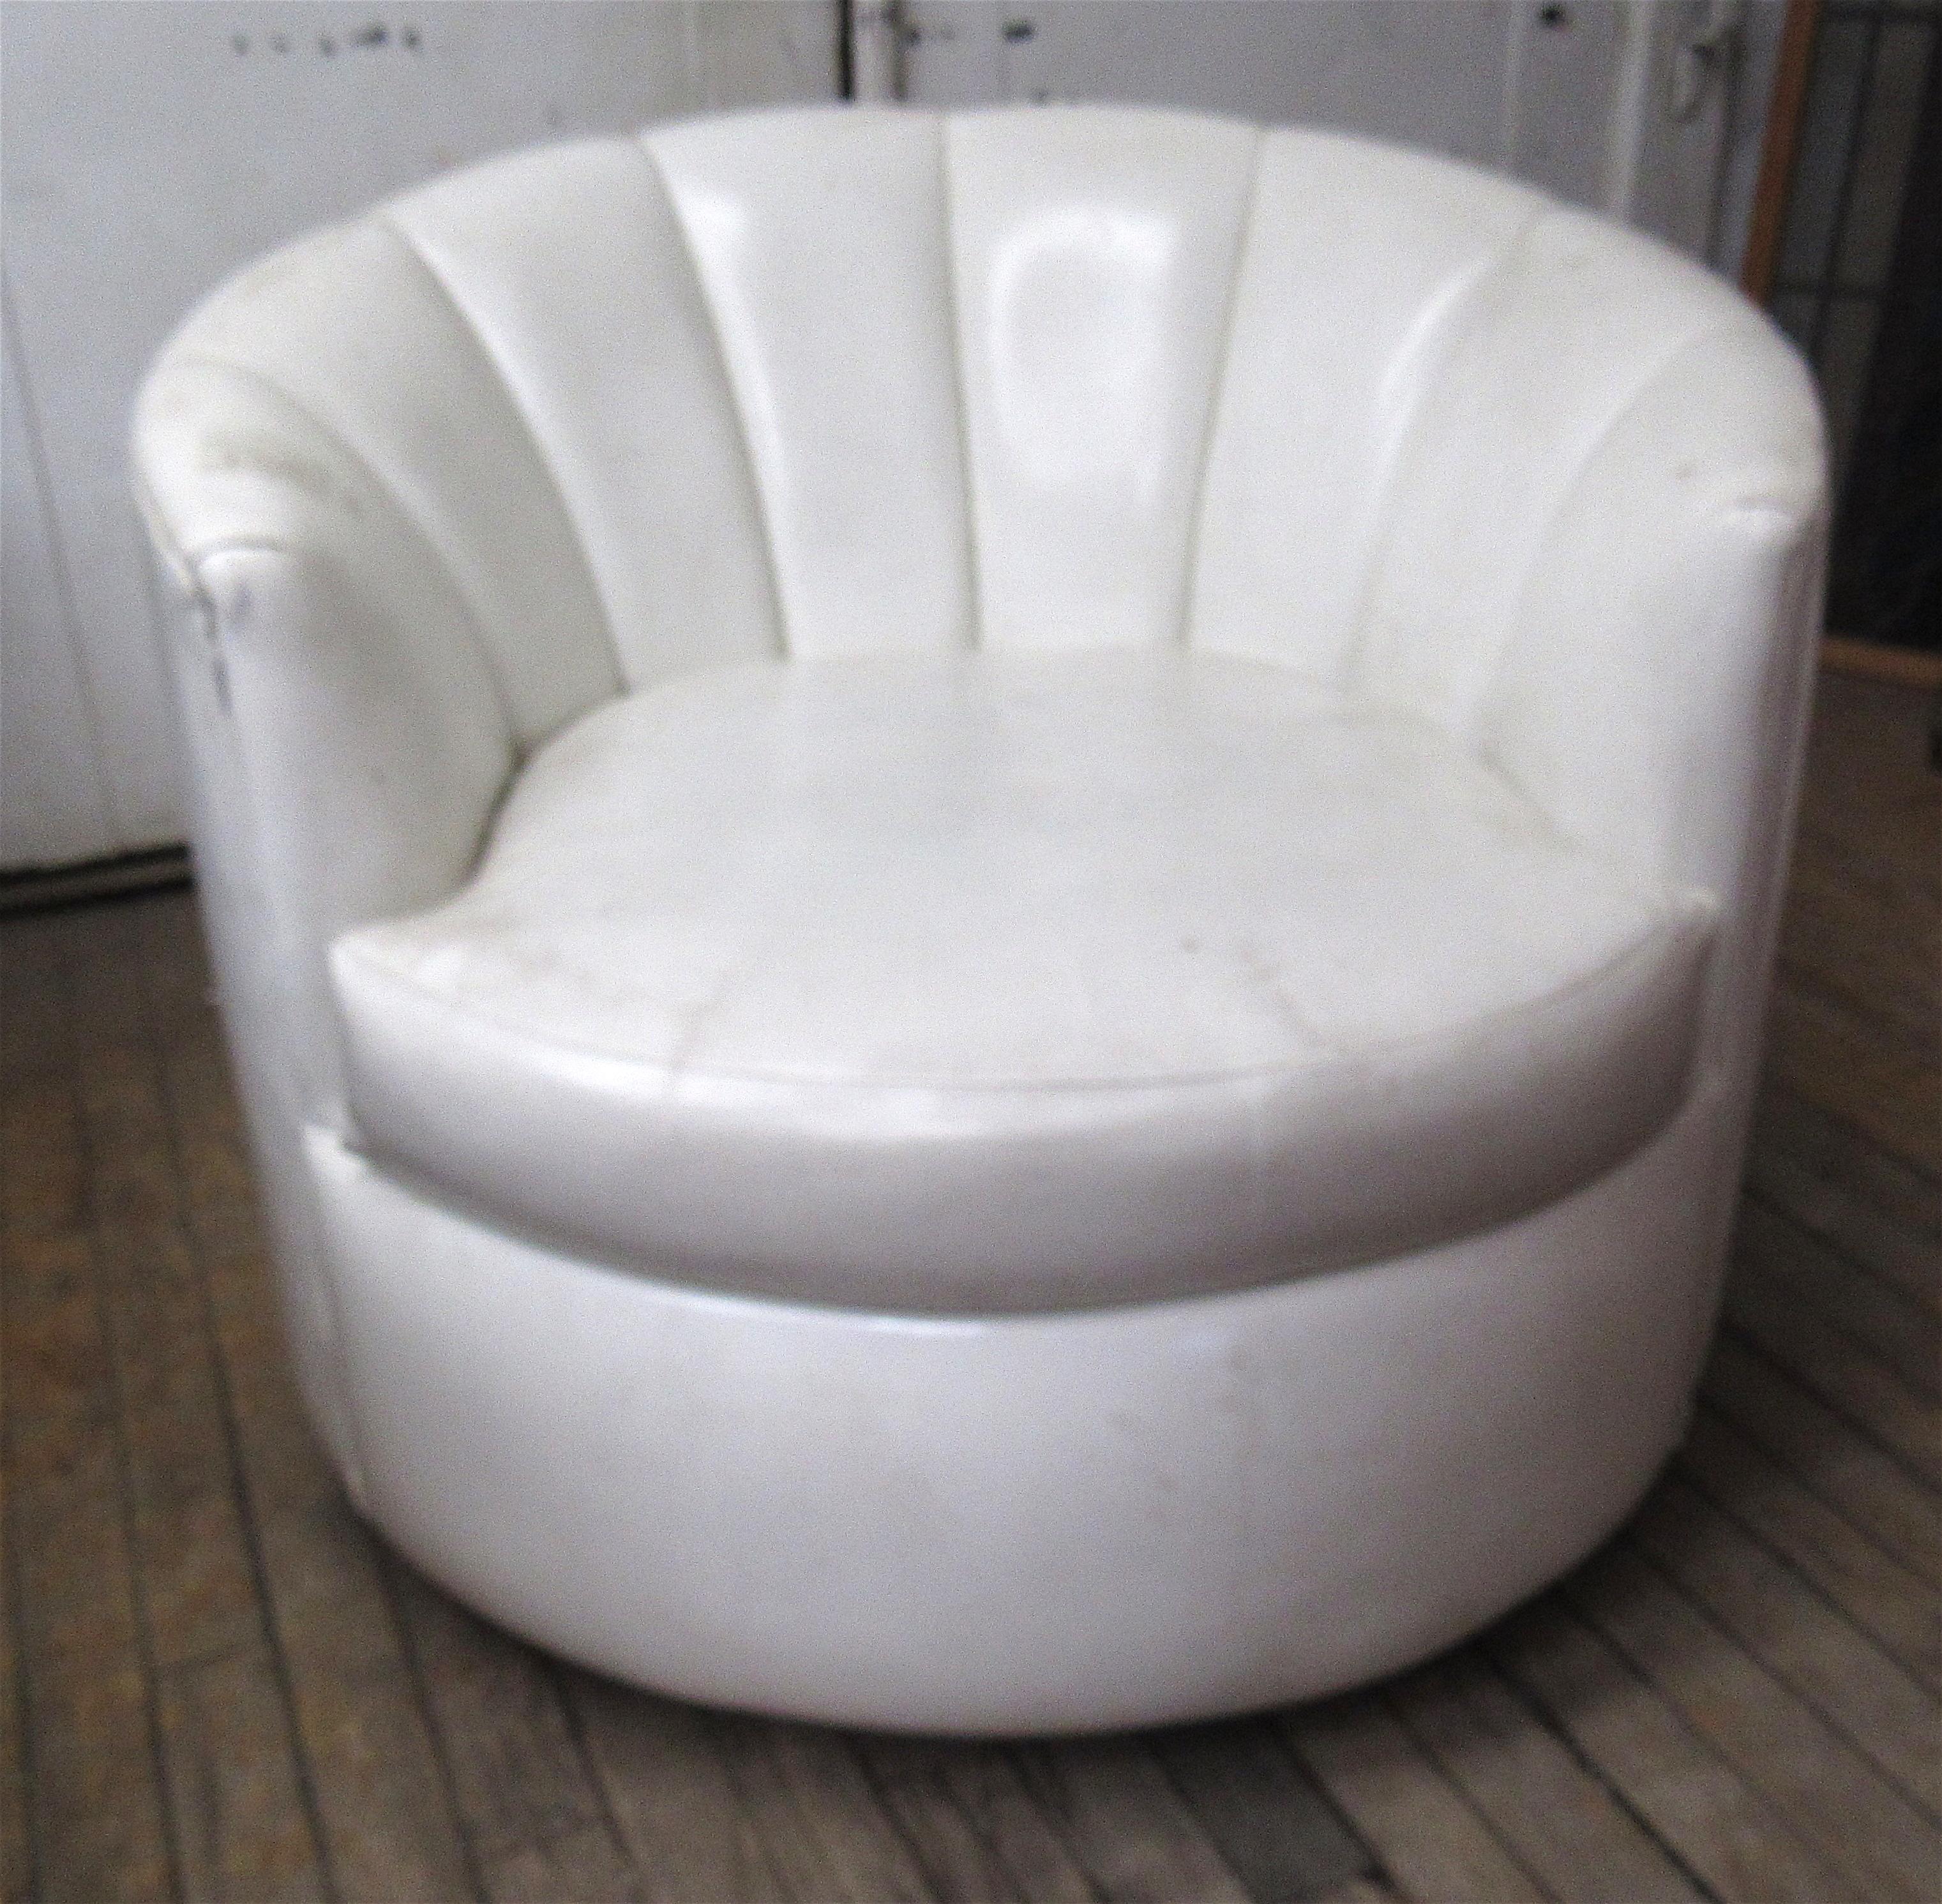 White vinyl club chair with thick cushioning. Clam style lounge chair.
Please confirm location NJ or NY.